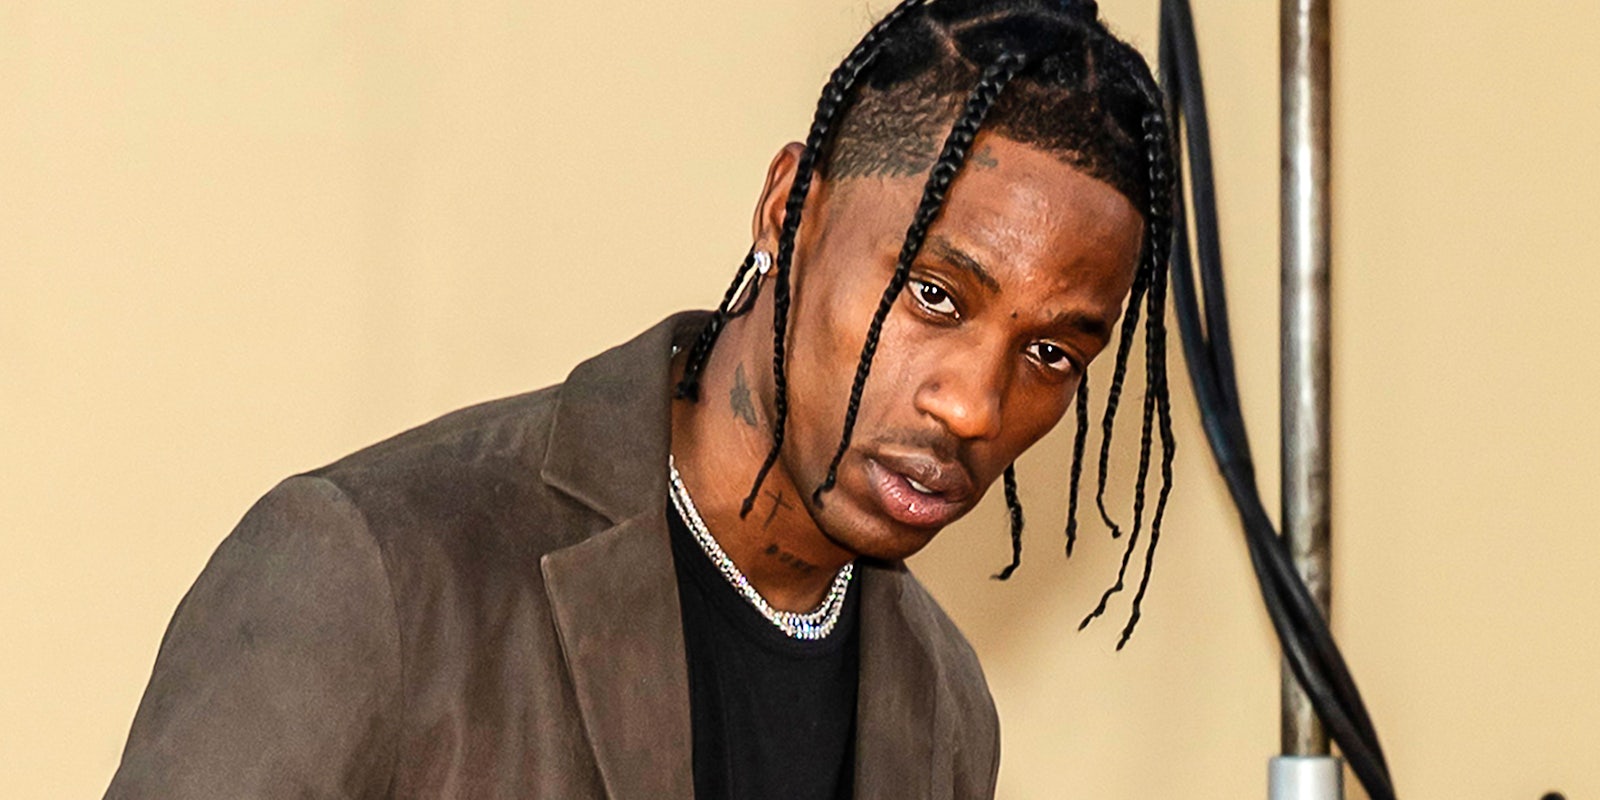 Travis Scott attends The Los Angeles Premiere Of 'Once Upon a Time in Hollywood' held at TCL Chinese Theatre